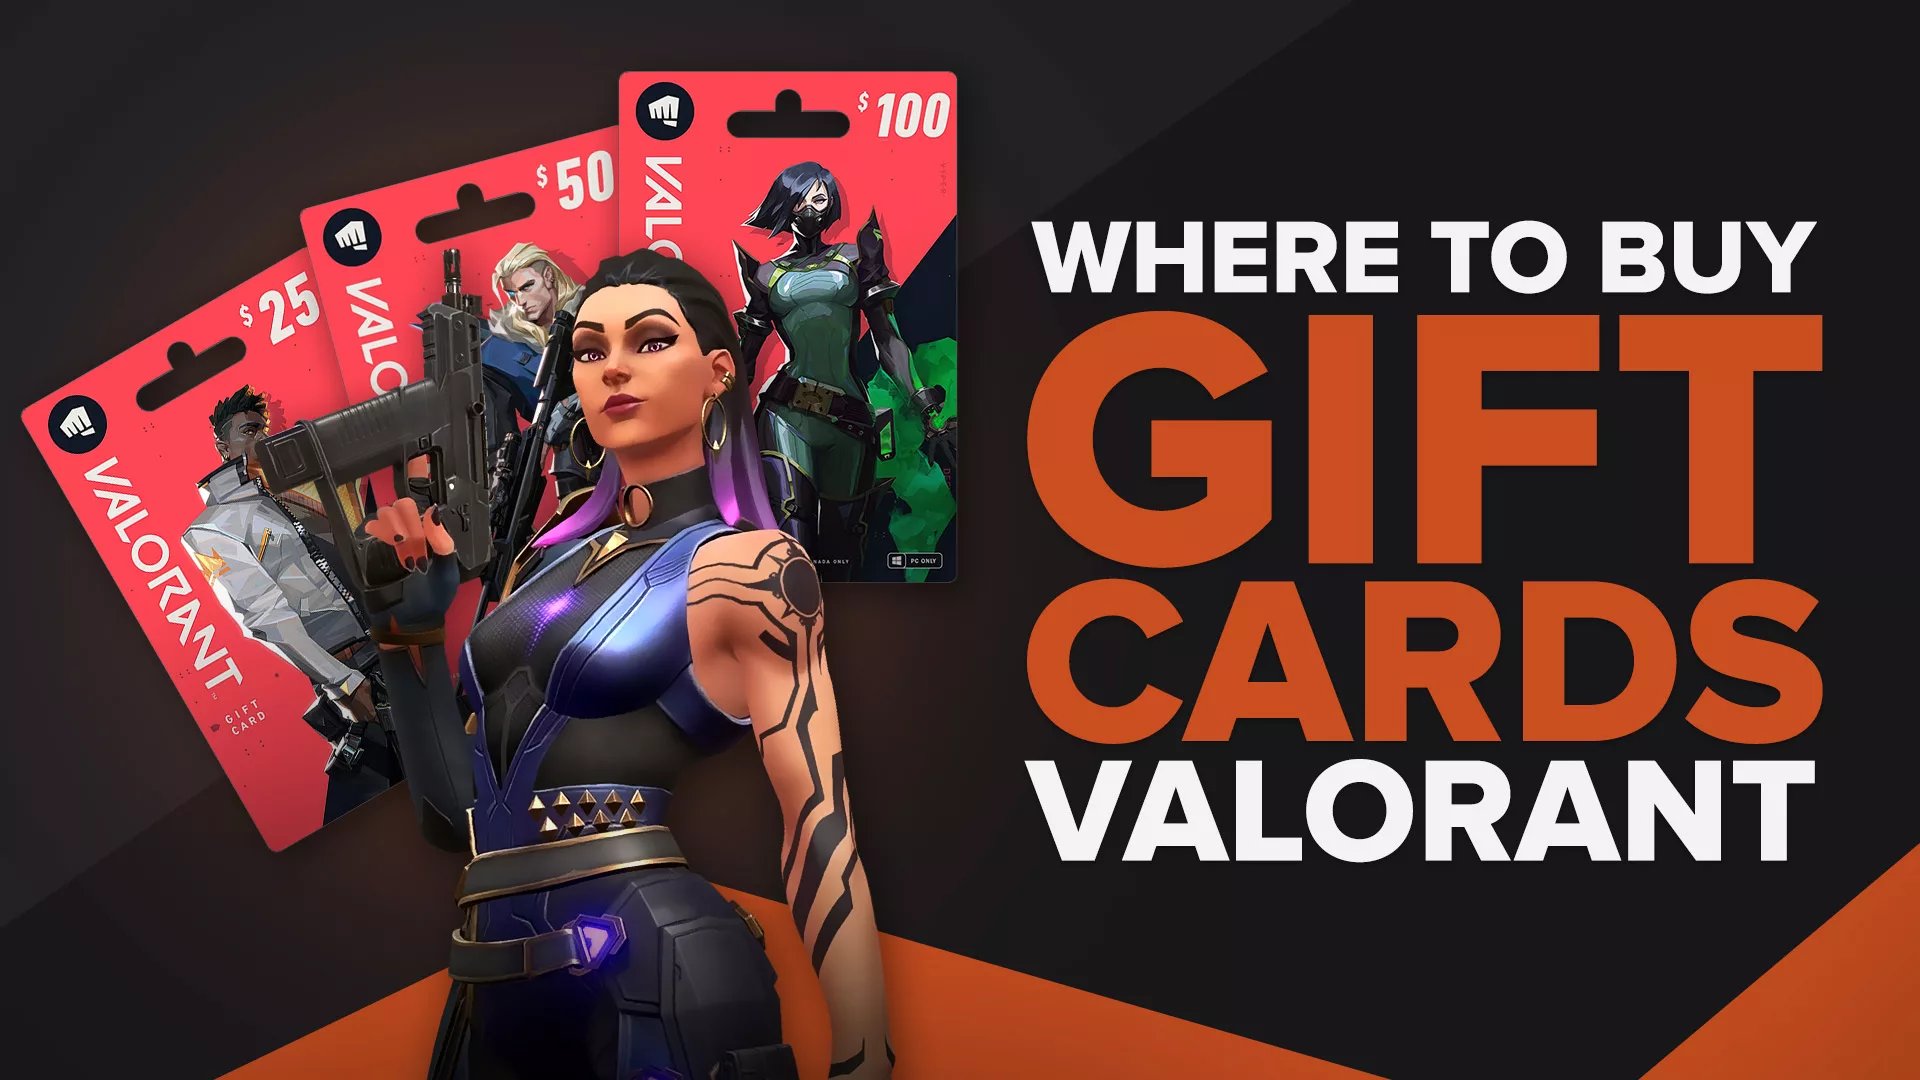 Where Can You Buy Valorant Gift Cards And Redeem Them?